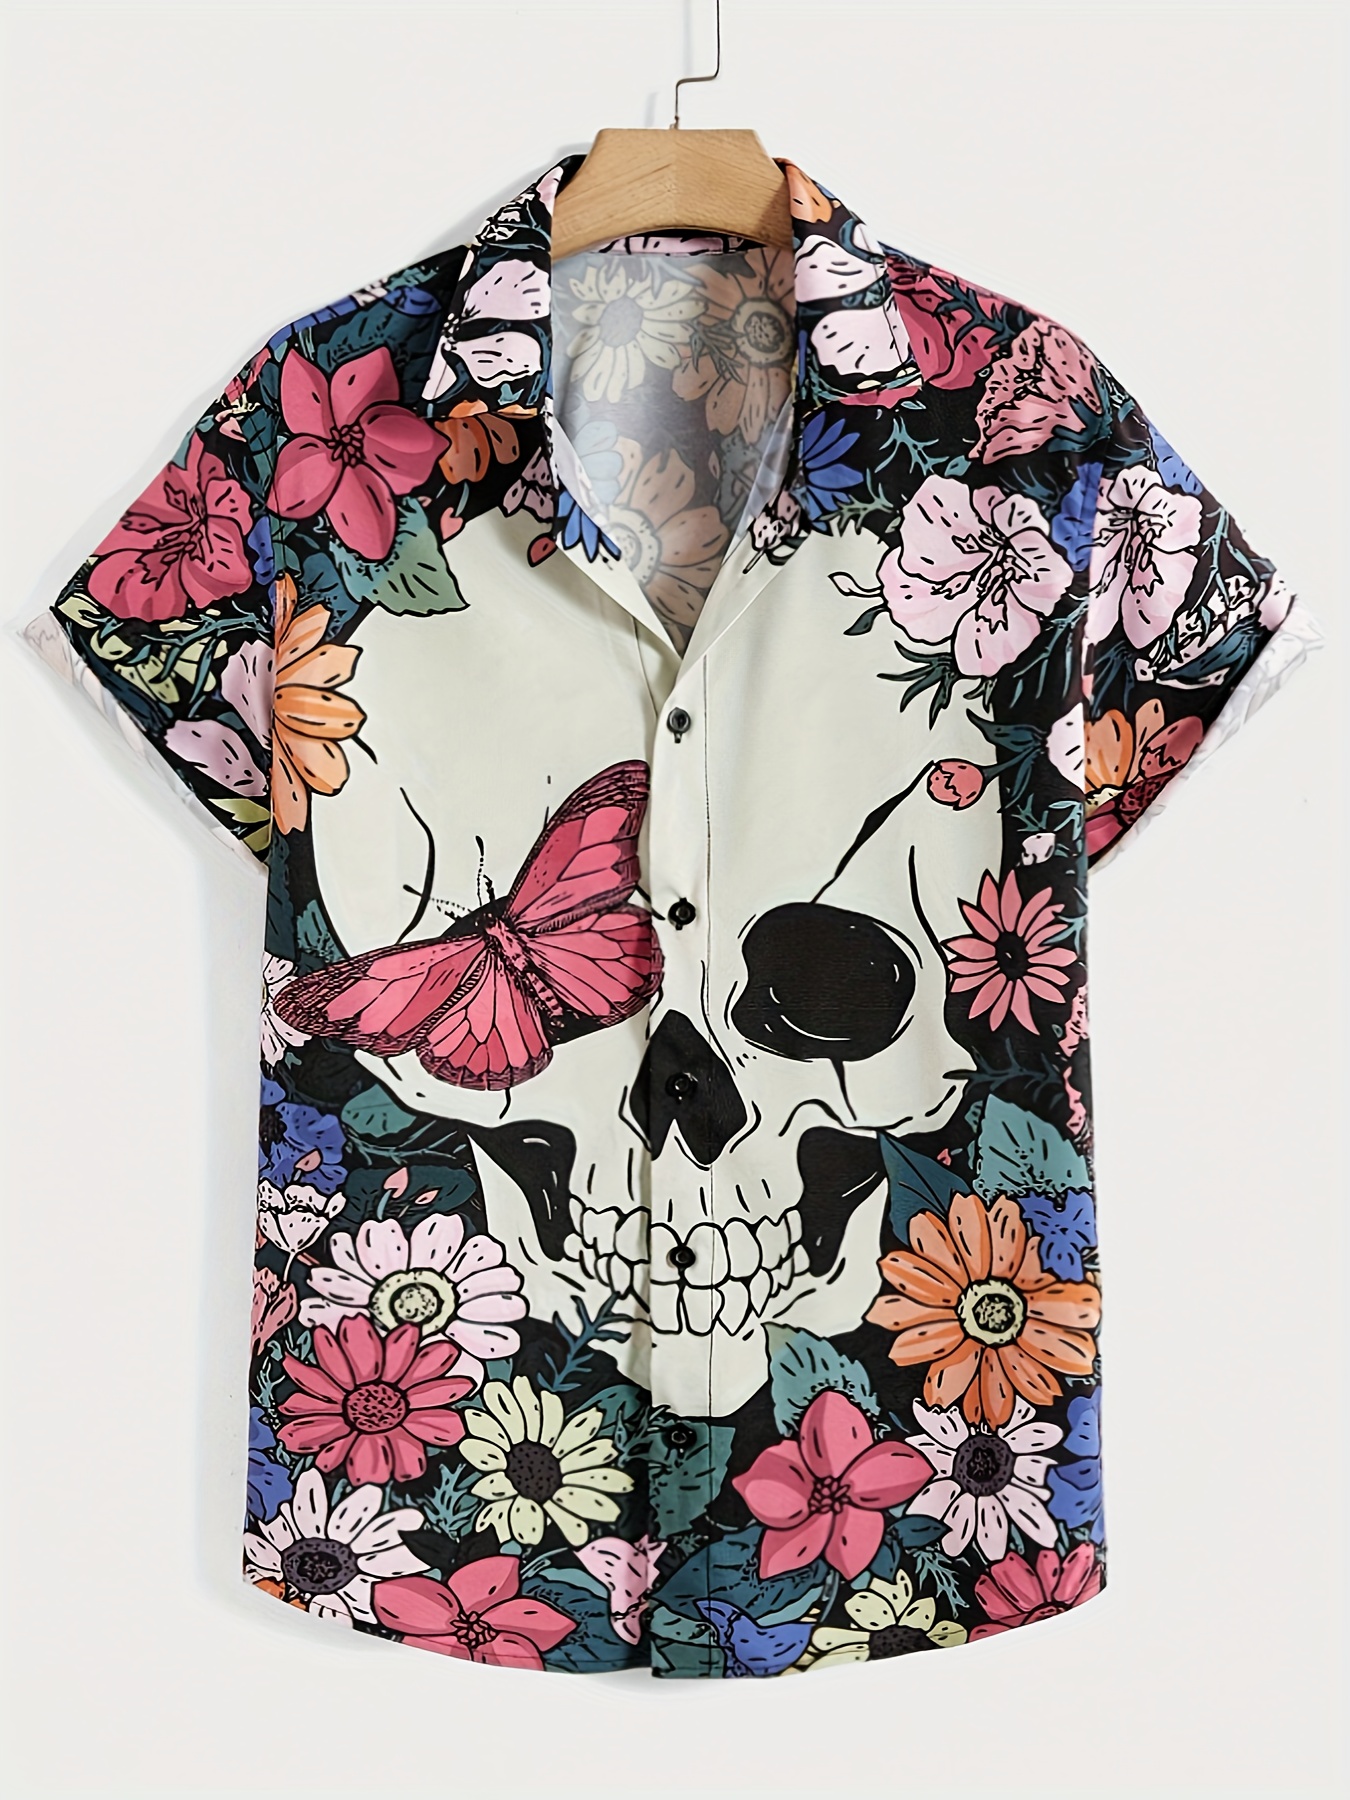 mens stylish loose skull pattern shirt casual breathable lapel button up short sleeve shirt top for city walk street hanging outdoor activities details 1